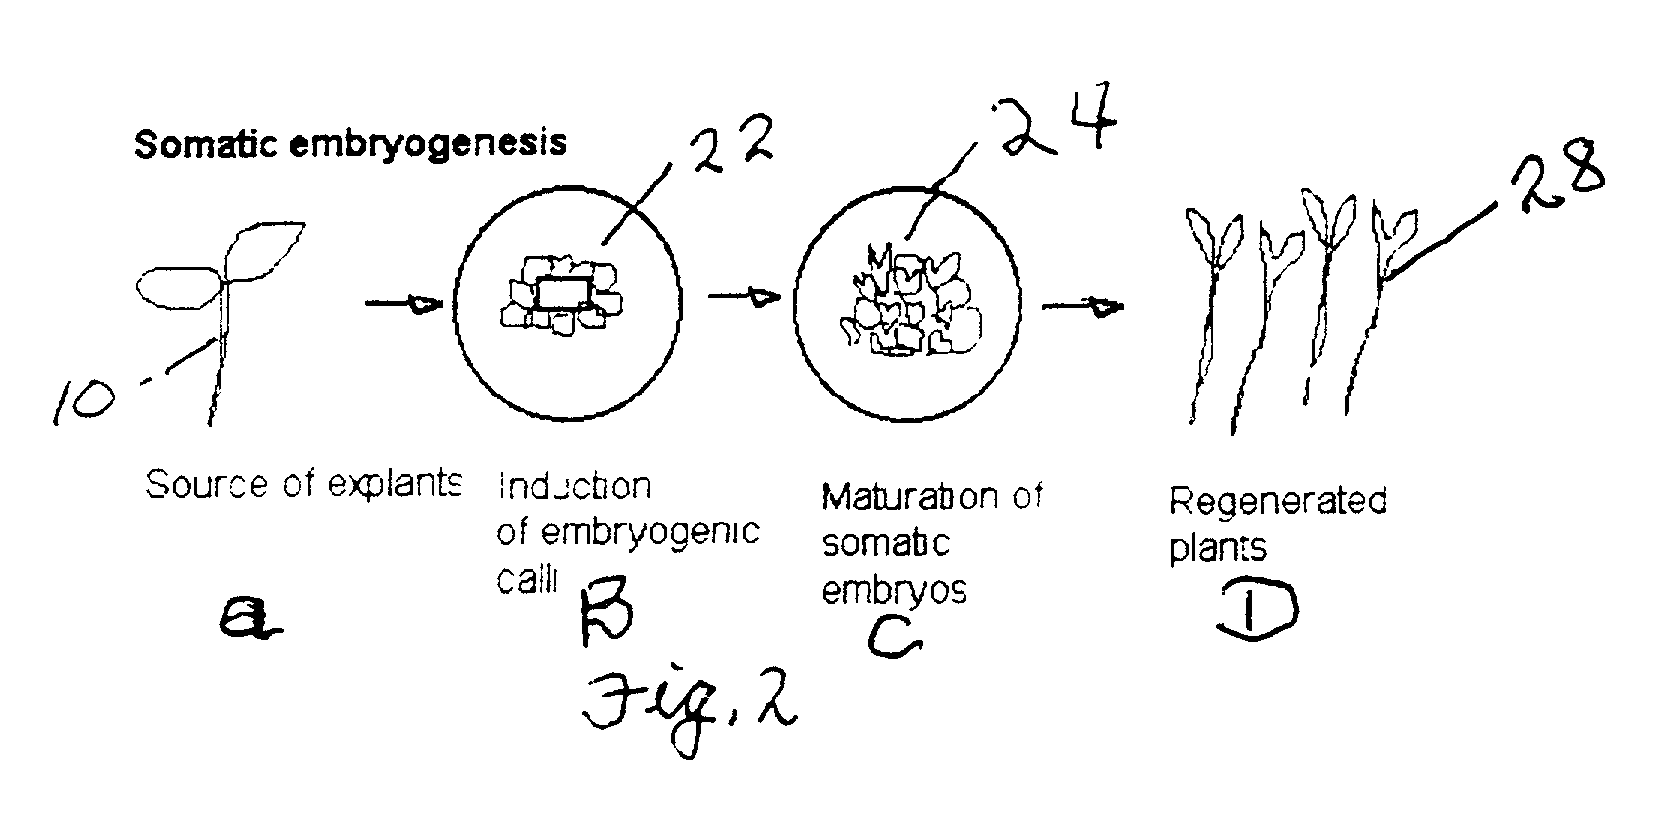 Methods to propagate plants via somatic embryogenesis and to transfer genes into ornamental statice and other members of the family plumbaginaceae